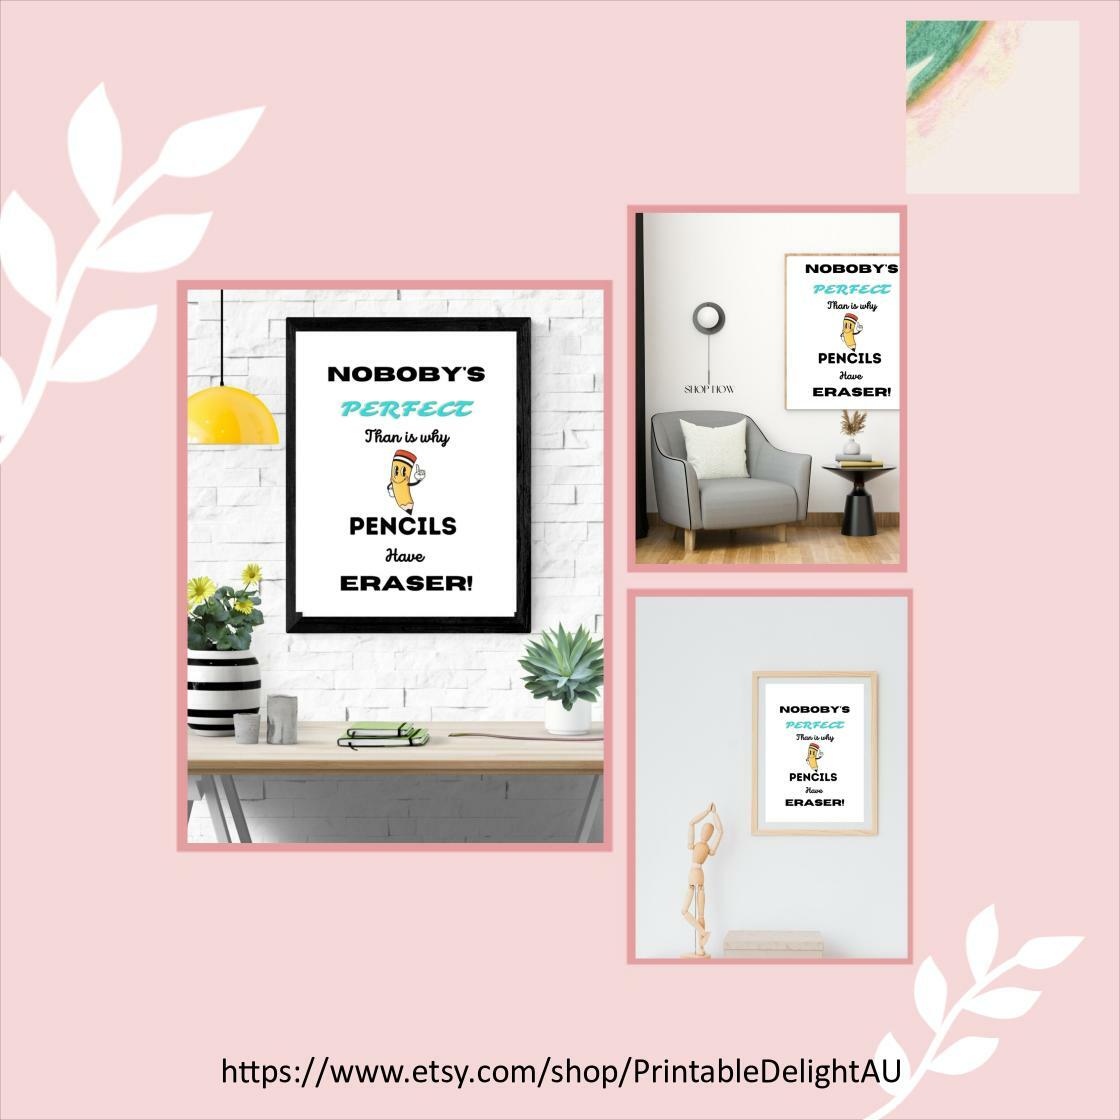 Unmissable! Check out this Nobody's Perfect: Inspirational Wall Art for Imperfectly Beautiful Spaces only at $4.95. 
etsy.com/listing/150947…
#HandmadePrints #DigitalArt